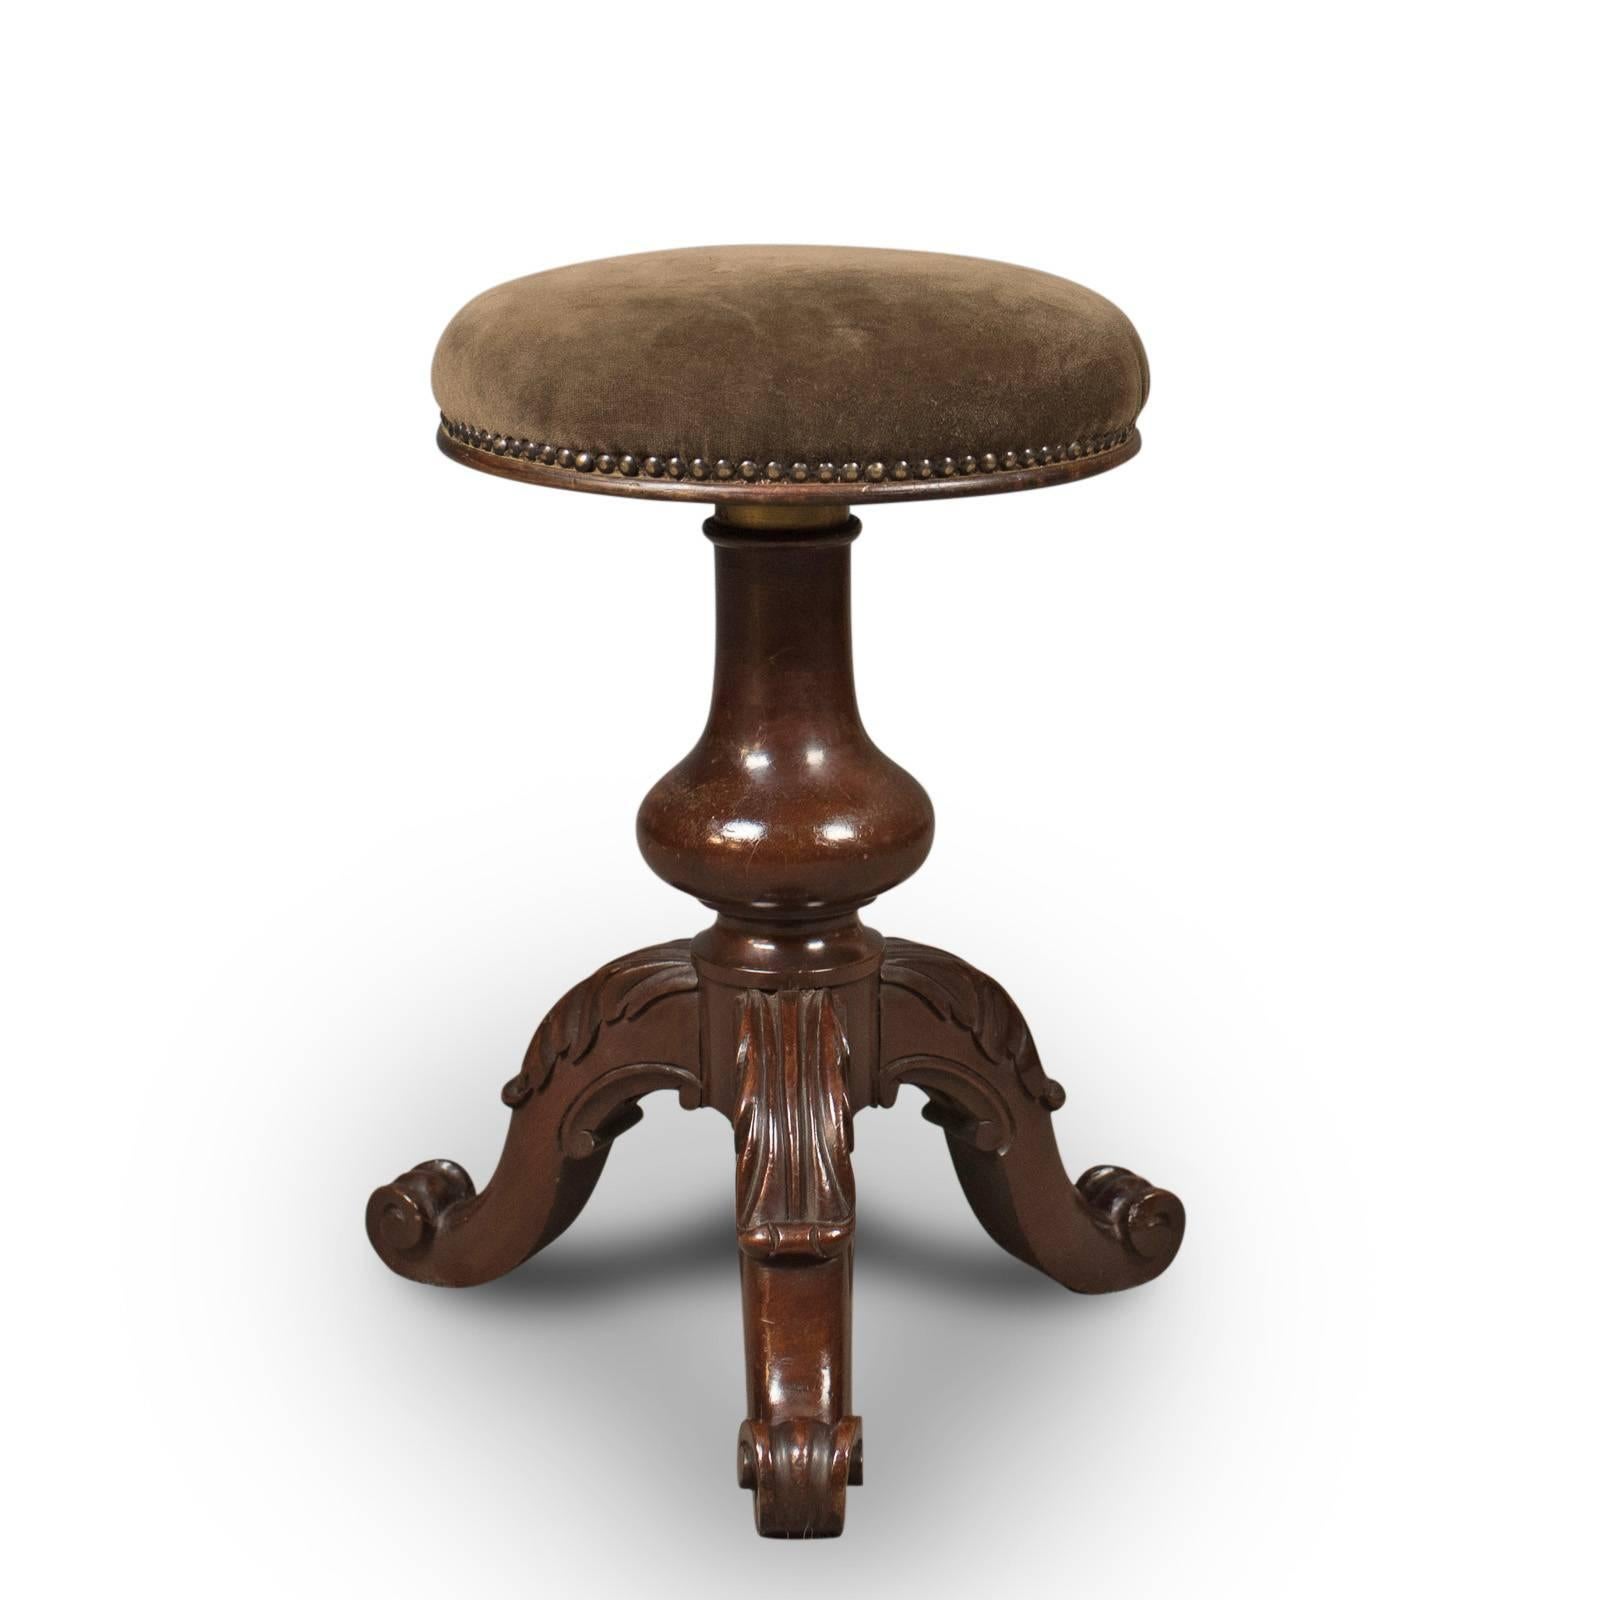 This is an adjustable, antique piano stool in mahogany, Victorian, dating to the latter part of the 19th century, English, circa 1880.

Beautifully made in solid mahogany with a waxed finish and desirable aged patina
Raised on a tripod of